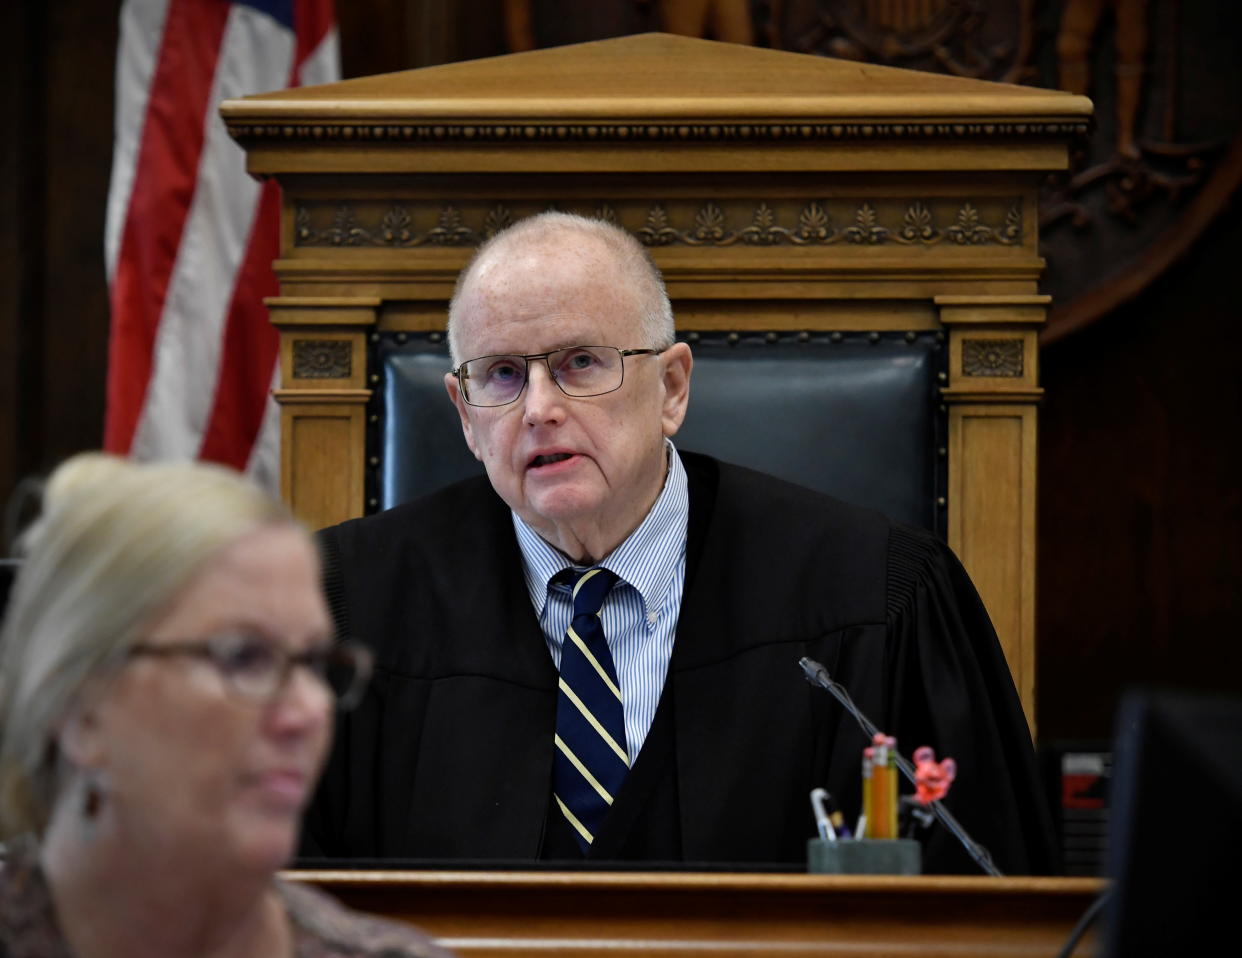 Judge Bruce Schroeder, seated, speaks during Kyle Rittenhouse's trial at the Kenosha County Courthouse in Kenosha, Wisconsin.